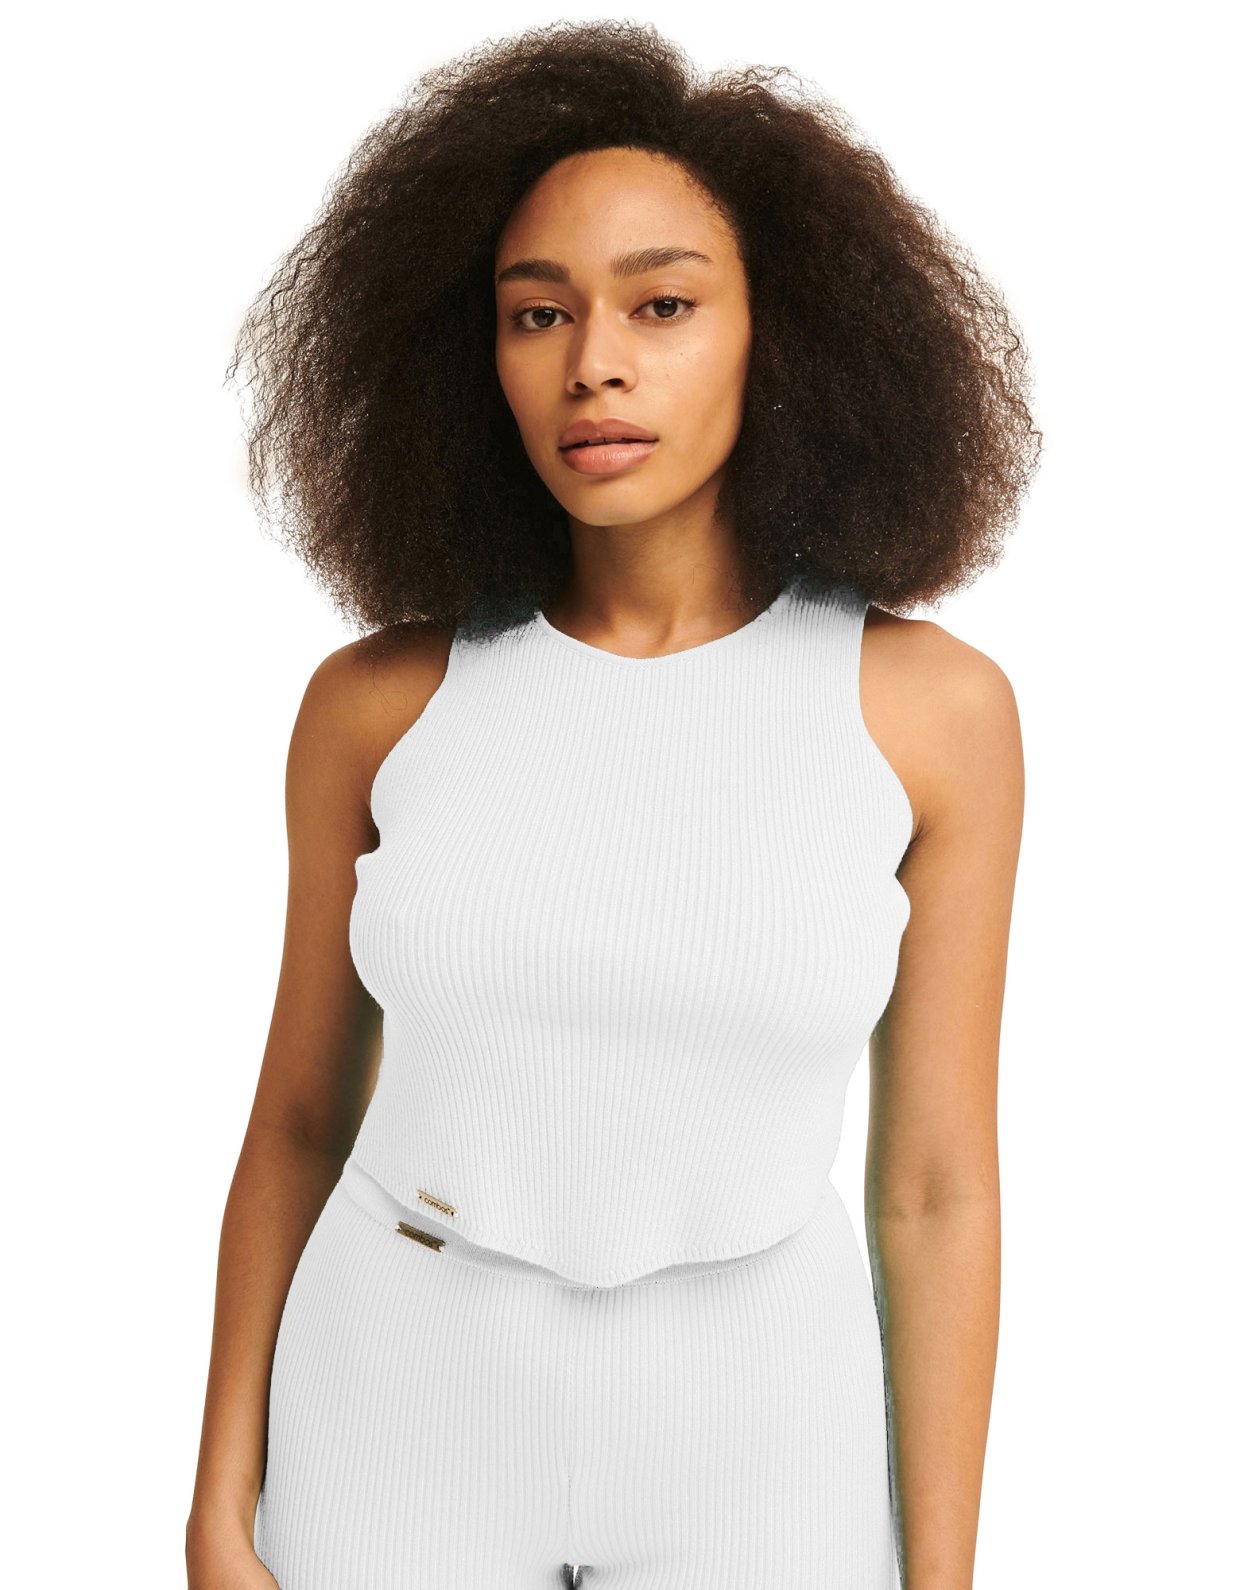 Combos Knitwear Combos S27 – Ribbed crop top white